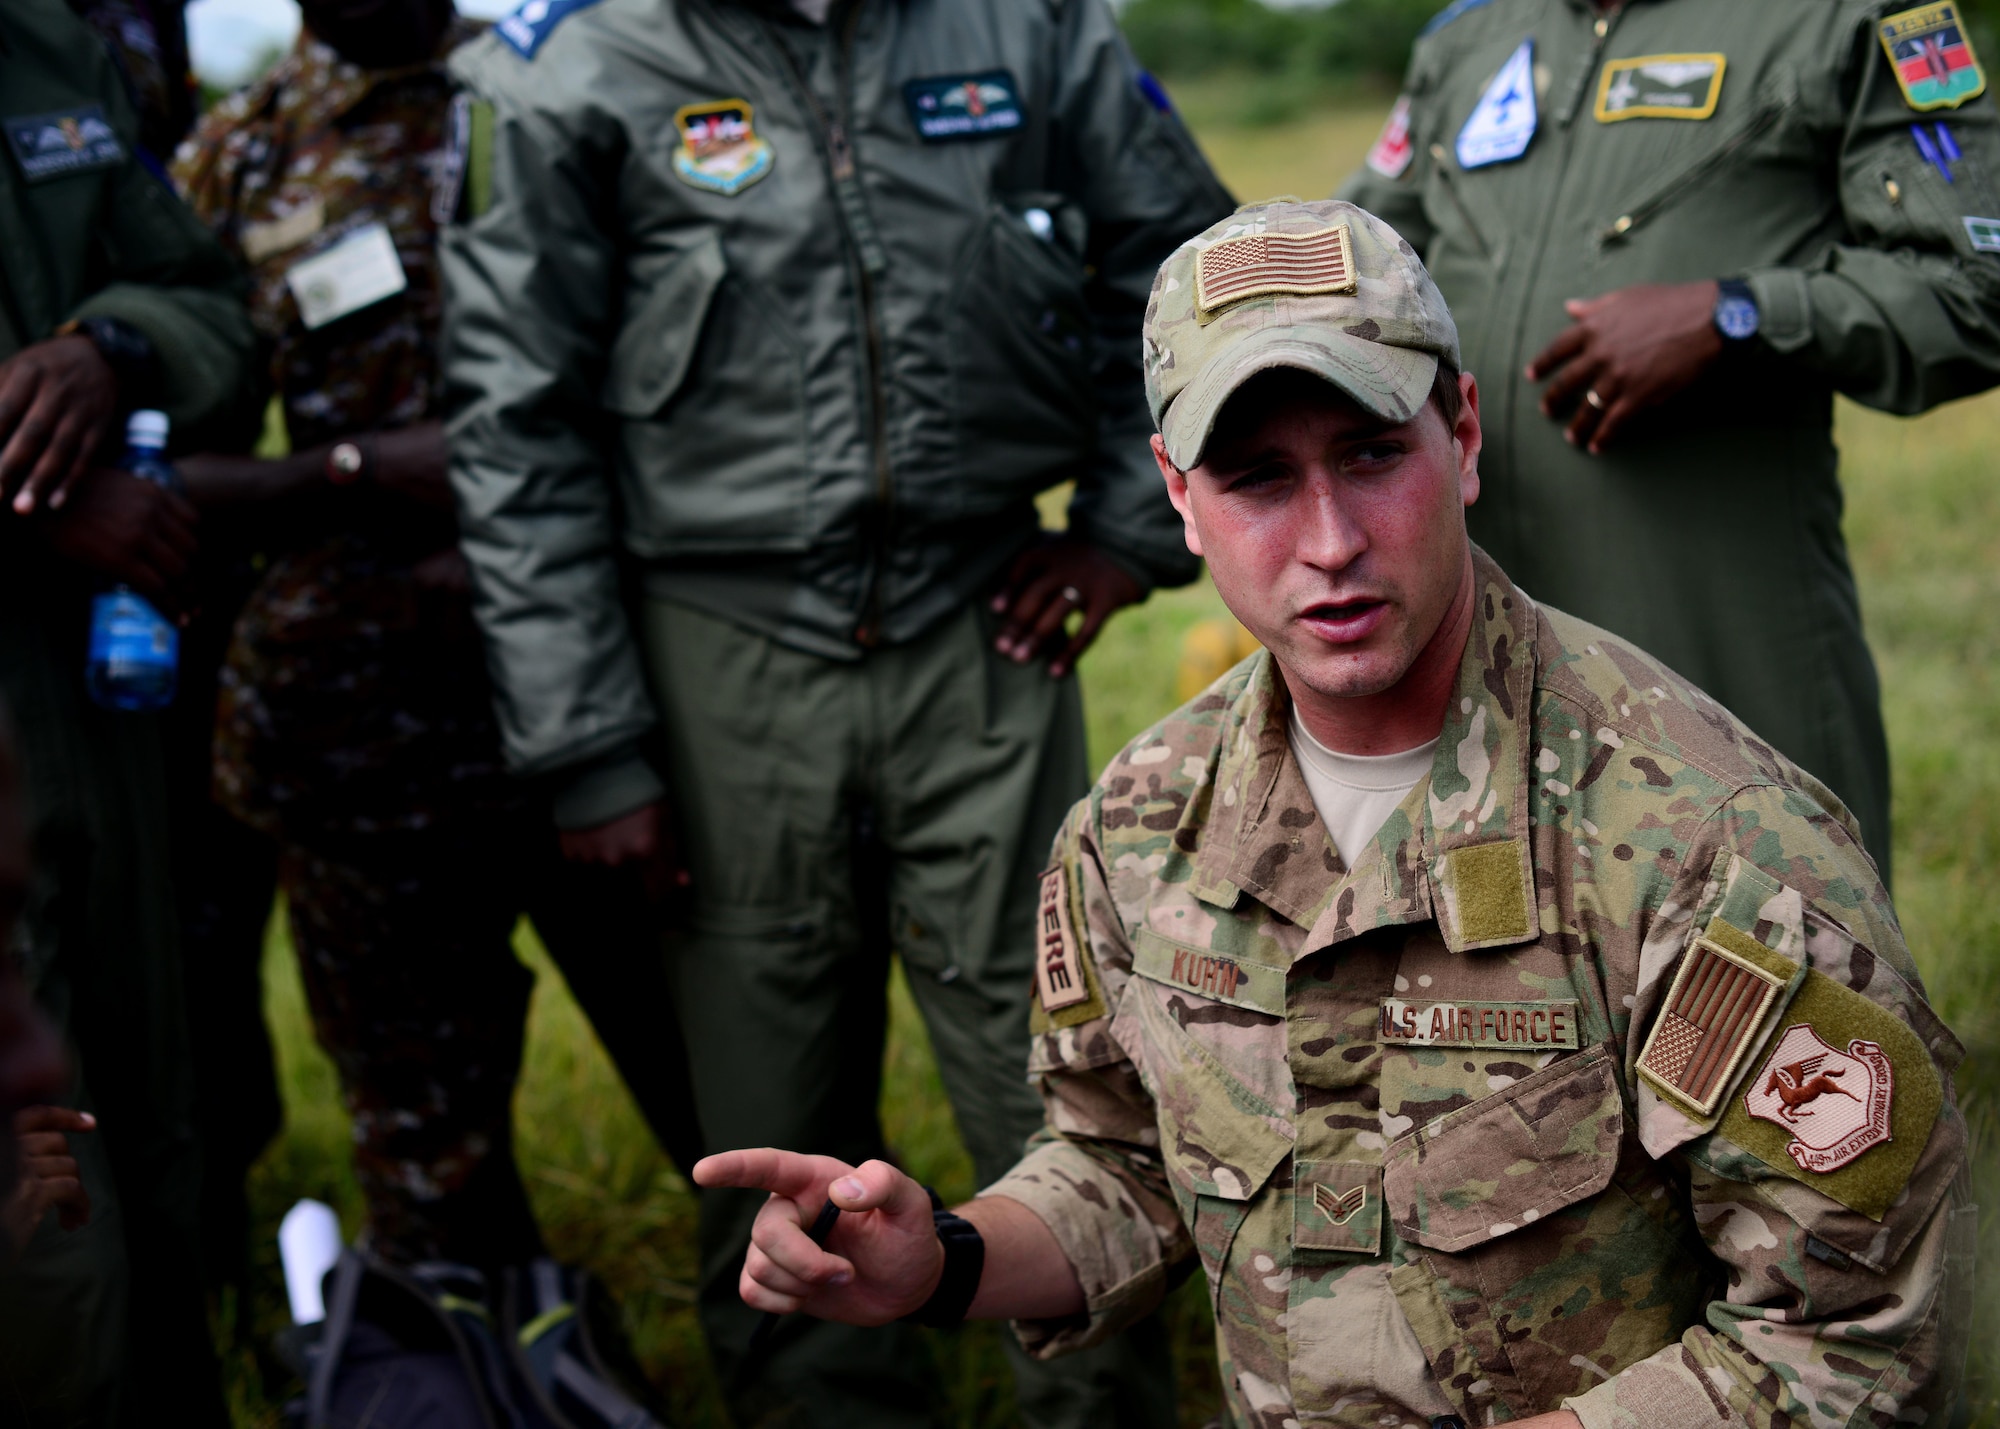 U.S. Air Force Senior Airman Ian Khun, 82nd Expeditionary Rescue Squadron, survival evasion resistance and escape specialist, discusses land navigation instruction with Kenyan Defense Force members at Laikipia Air Base, Kenya, June 23, 2016. More than 50 U.S. Air Force Airmen participated in the first African Partnership Flight in Kenya. The APF is designed for U.S. and African partner nations to work together in a learning environment to help build expertise and professional knowledge and skills in key areas such as personnel recovery command and control, survival and evasion principles and tactical combat casualty care.  (U.S. Air Force photo by Tech. Sgt. Evelyn Chavez/Released)